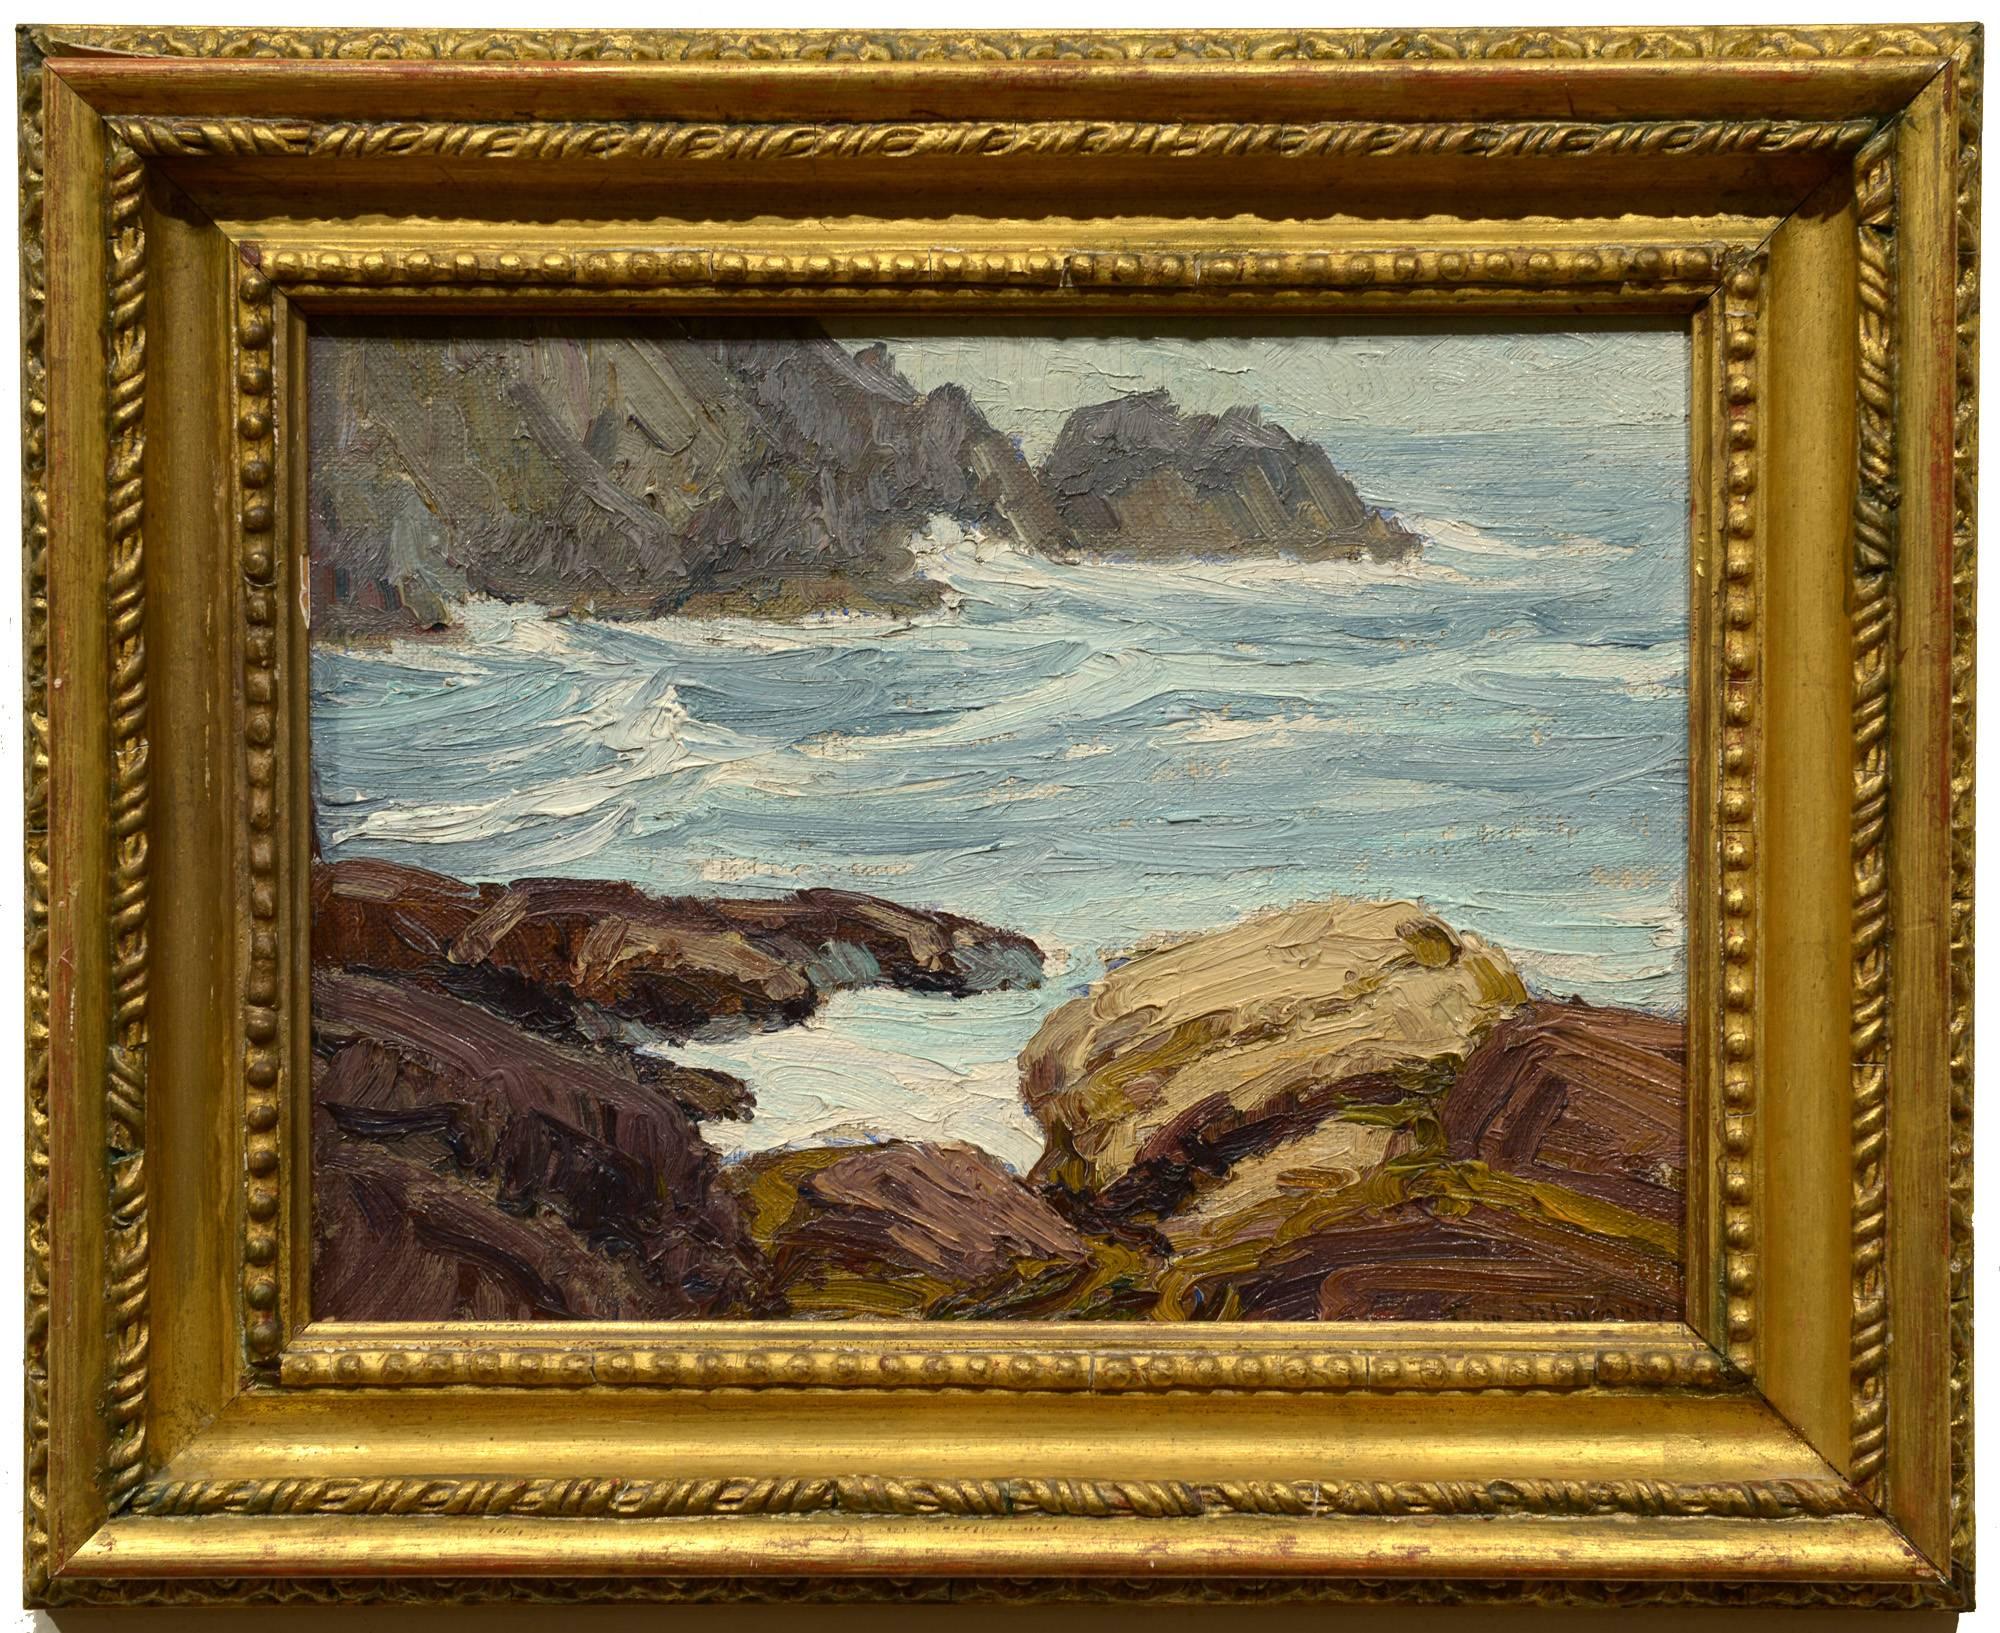 Foot of Whitehead, Monhegan - Painting by Theophile Schneider